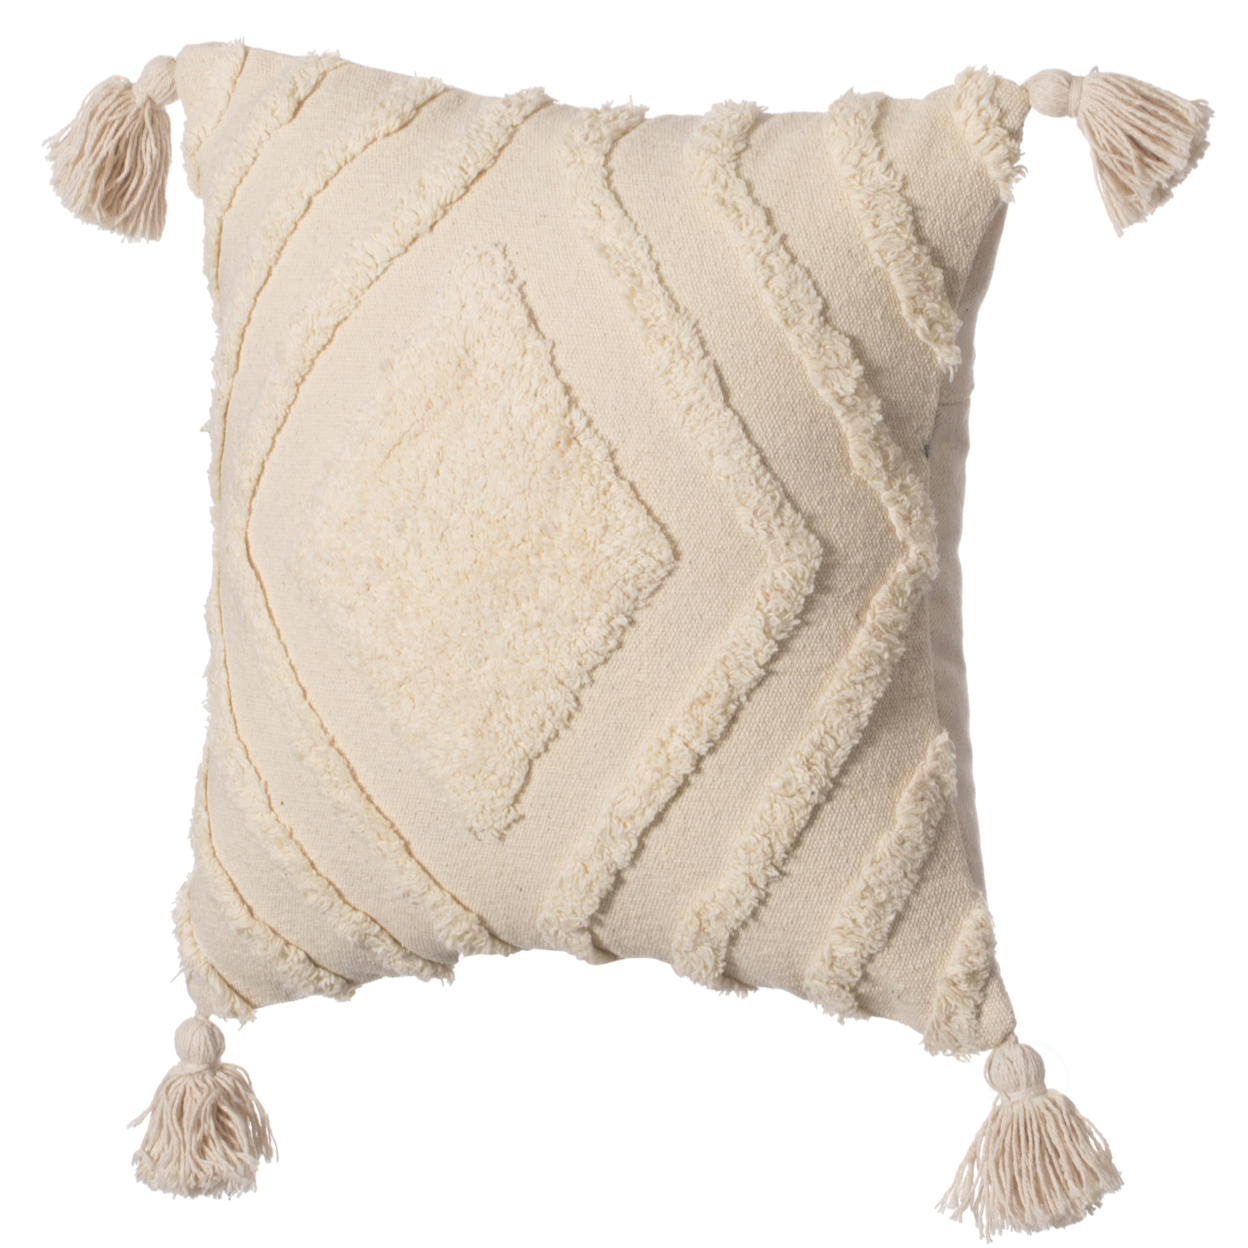 16 Handwoven Cotton Throw Pillow Cover With White On White Tufted Design And Tassel Corners - Lattice With Cushion